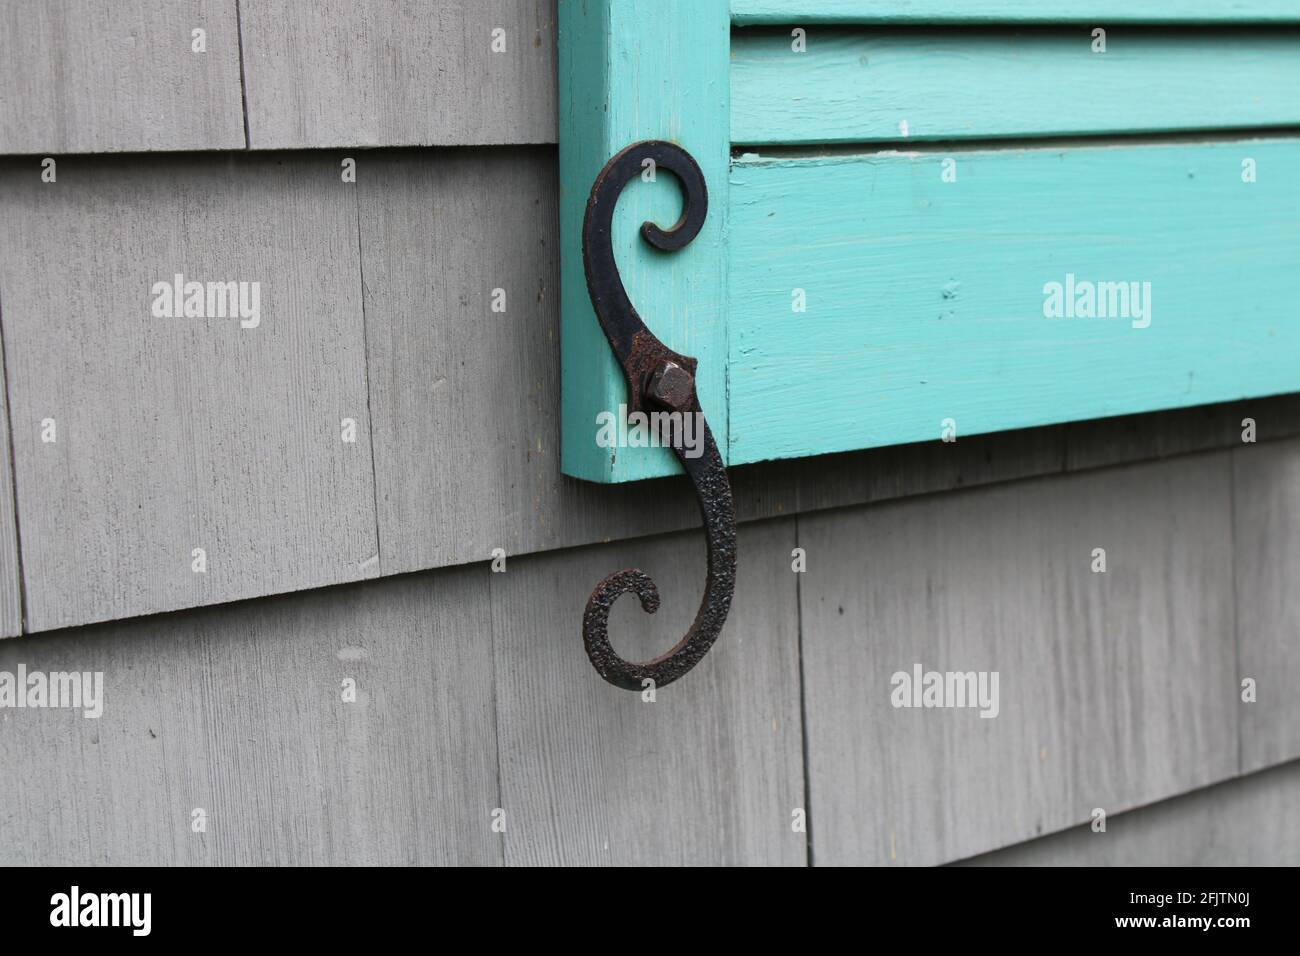 A Cast Iron Shutter Sash on A Turquoise Shutter Stock Photo